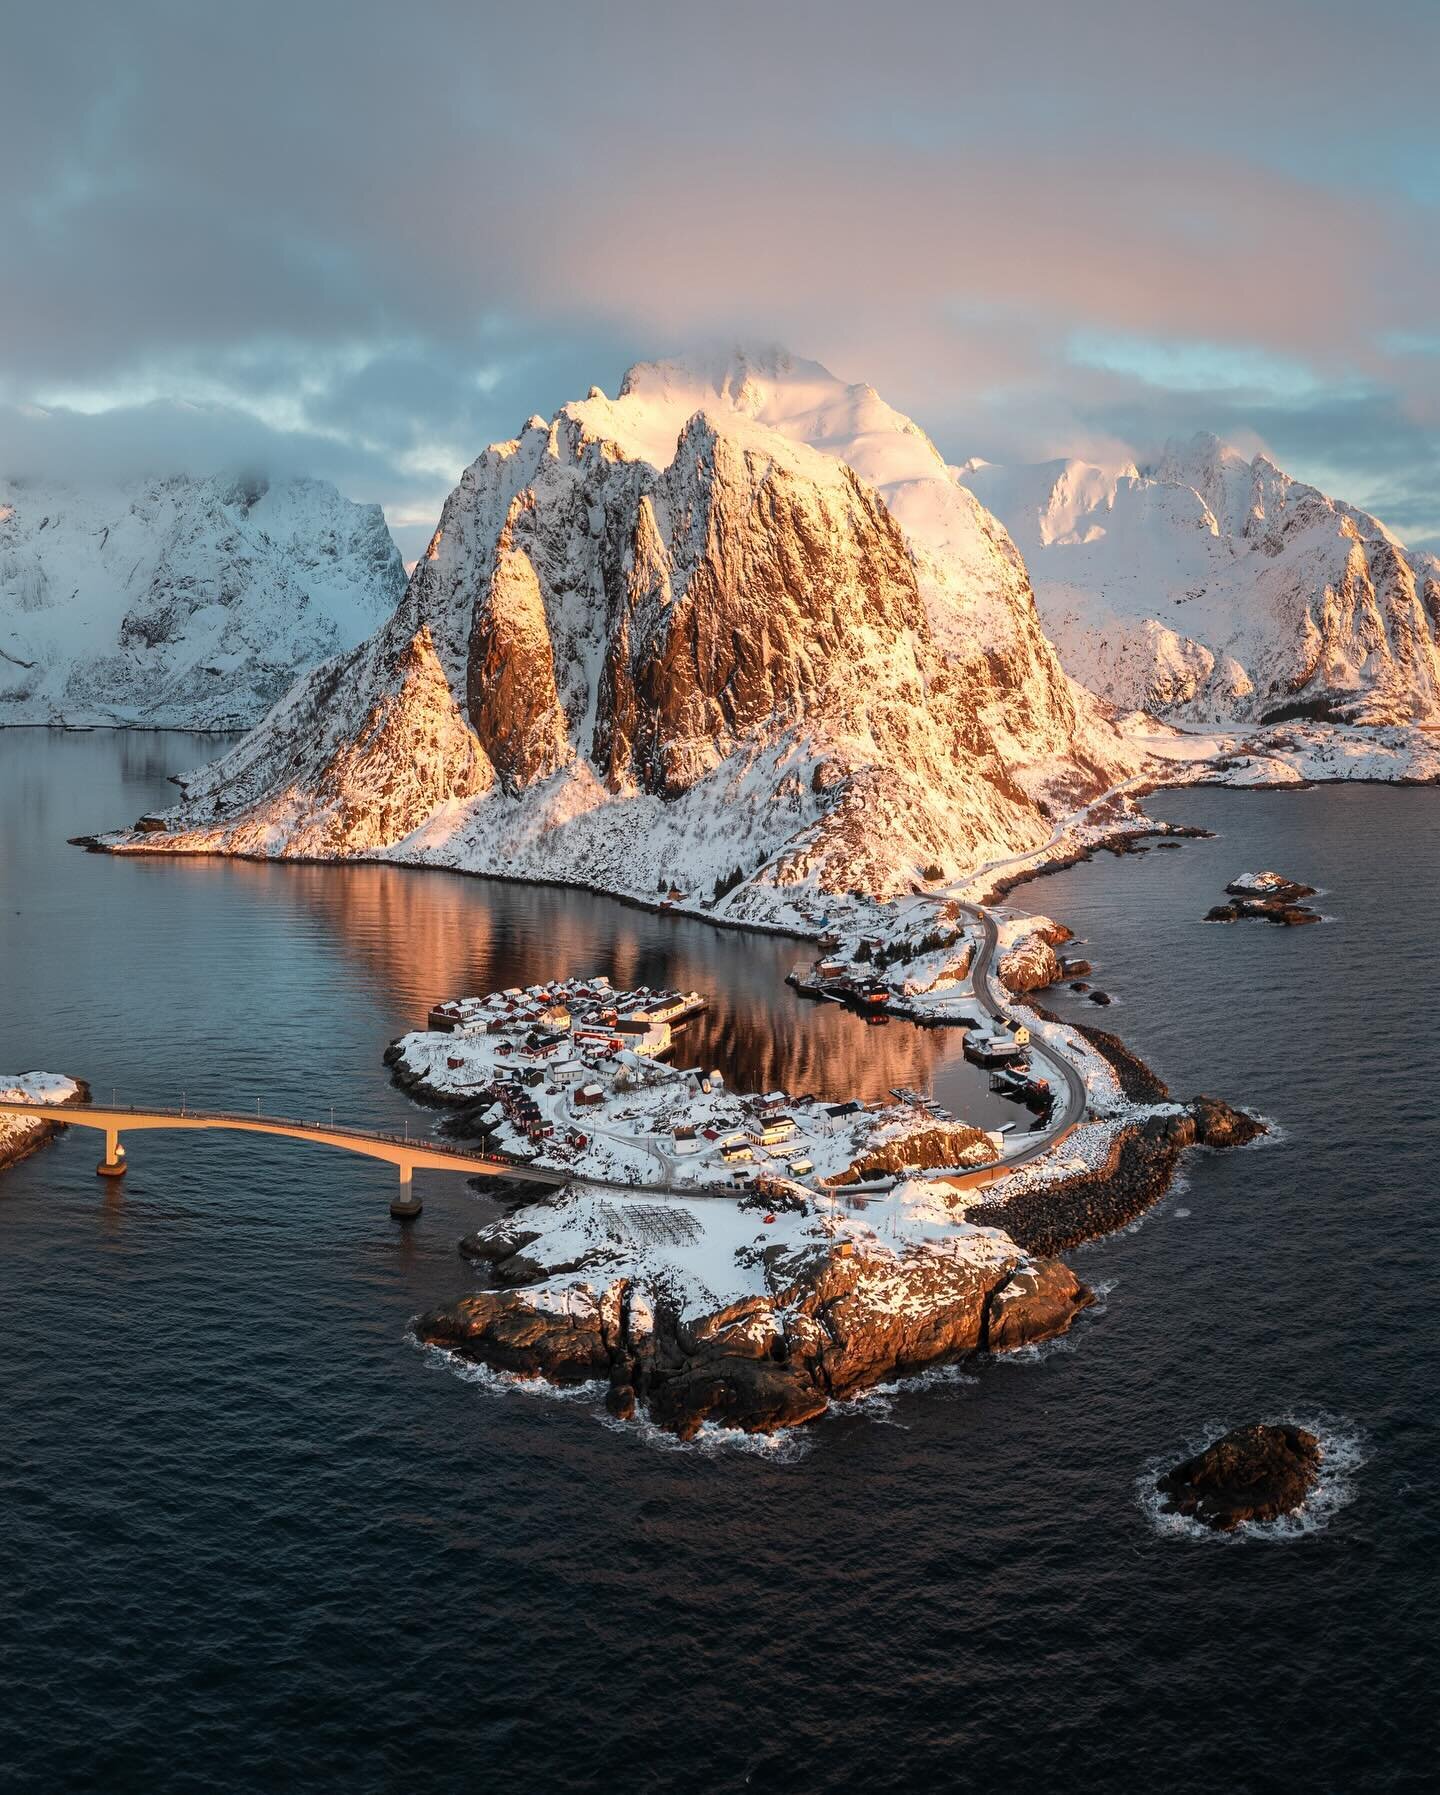 Swipe for the good stuff ➡️ Norway is easily one of the most photogenic places I&rsquo;ve ever been. The panoramas here are so incredible, I might *finally* print some photos for my office (something I&rsquo;ve been meaning to do for years) 📸 any re